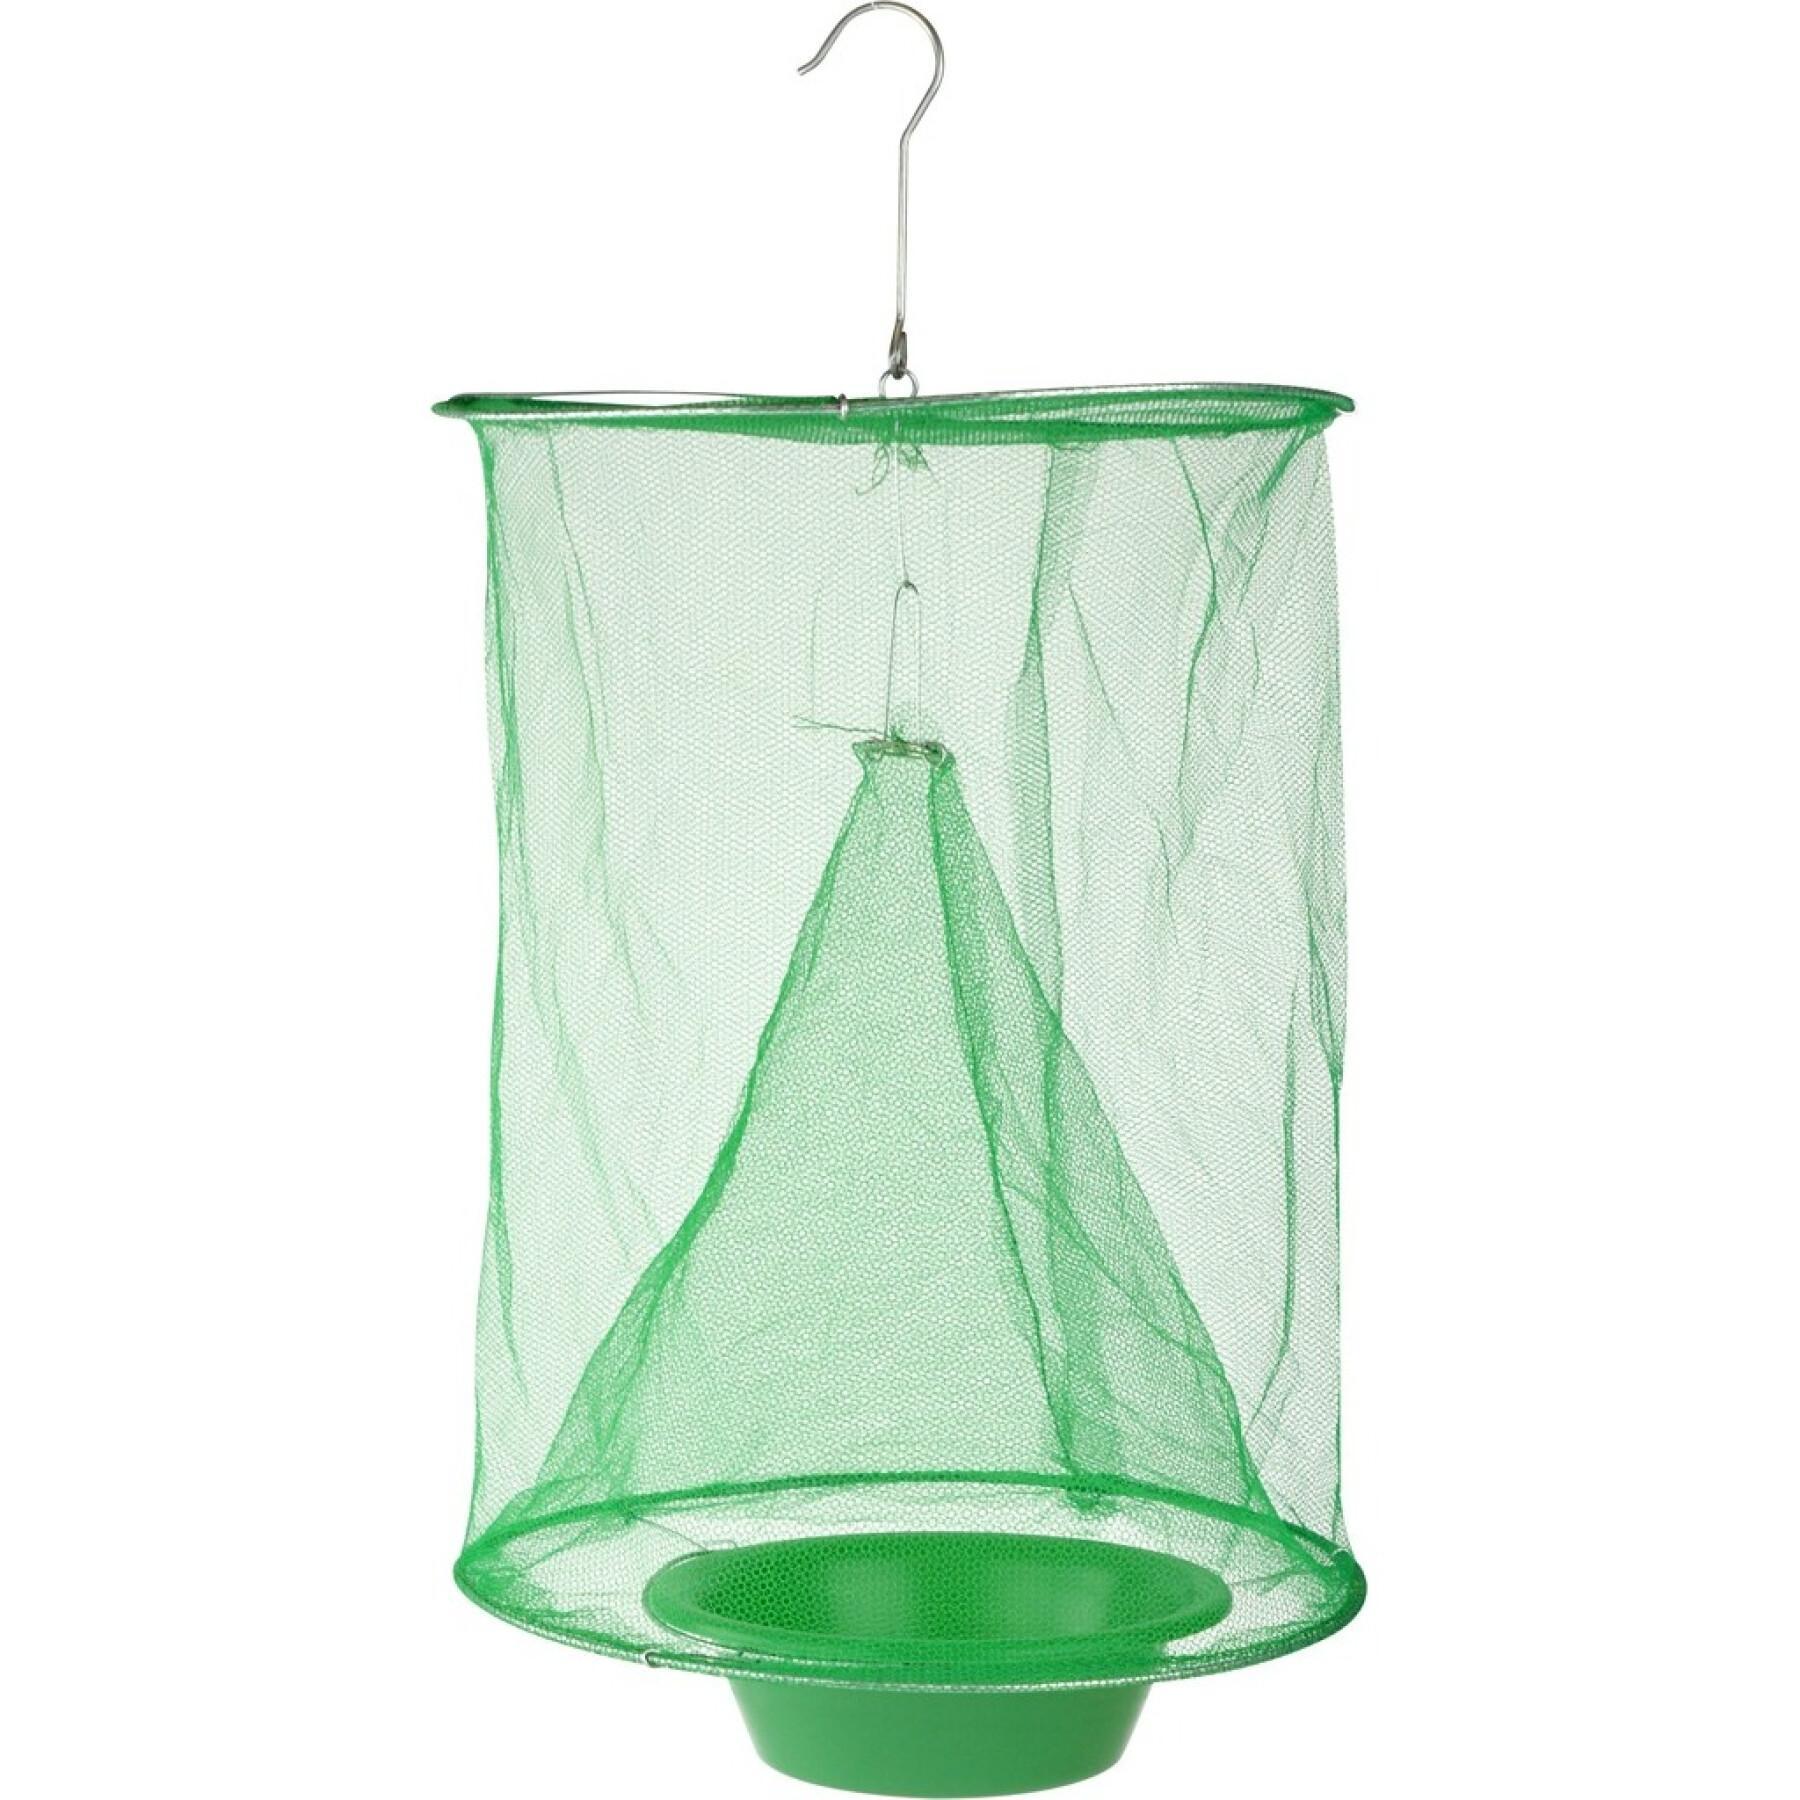 Insect trap Hippotonic